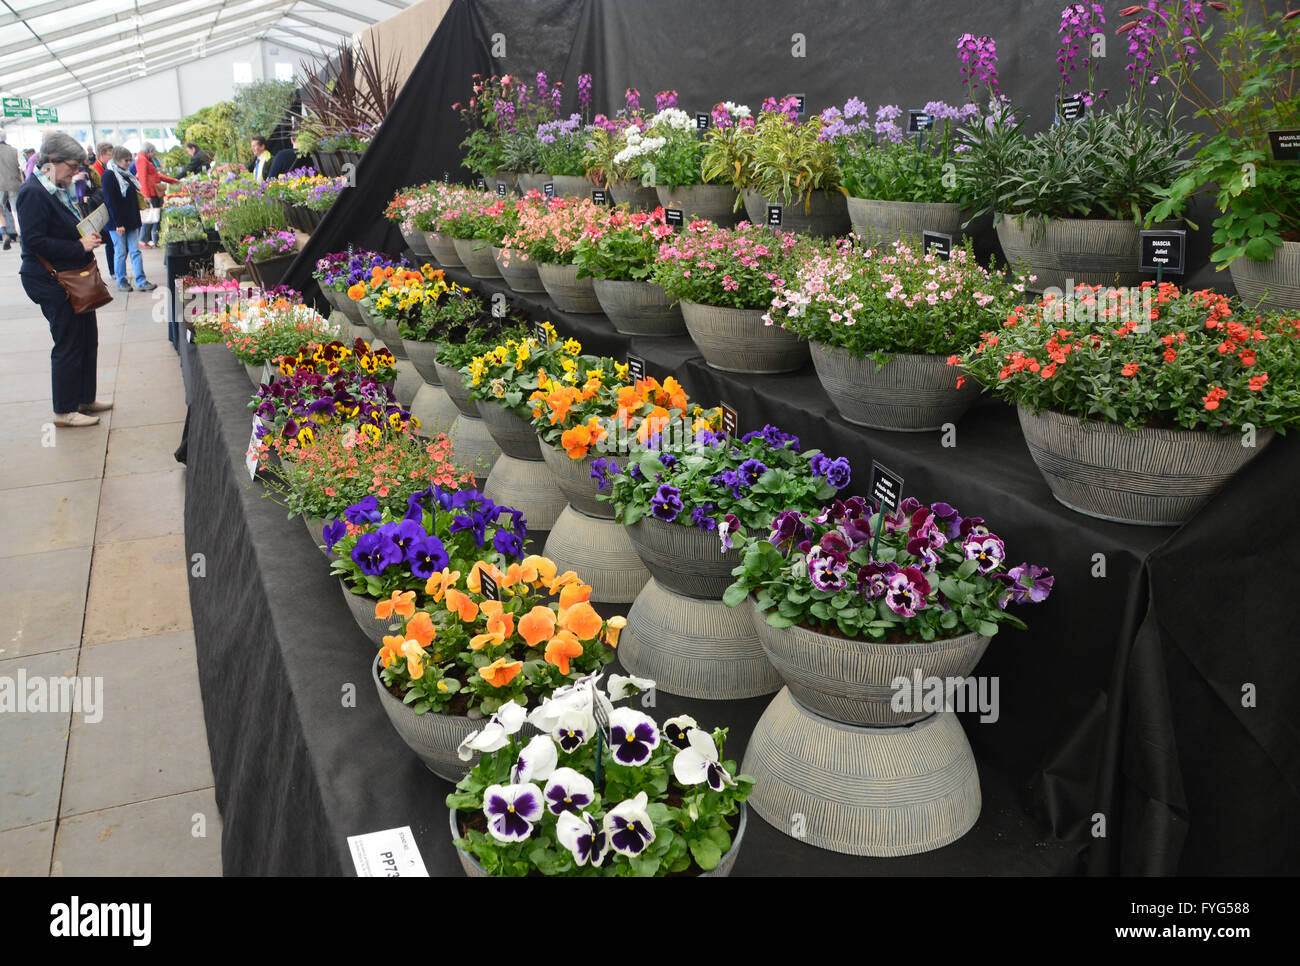 A Woman Looking at Flower Displays in the Plant Pavilion at the Harrogate Spring Flower Show. Yorkshire UK. Stock Photo